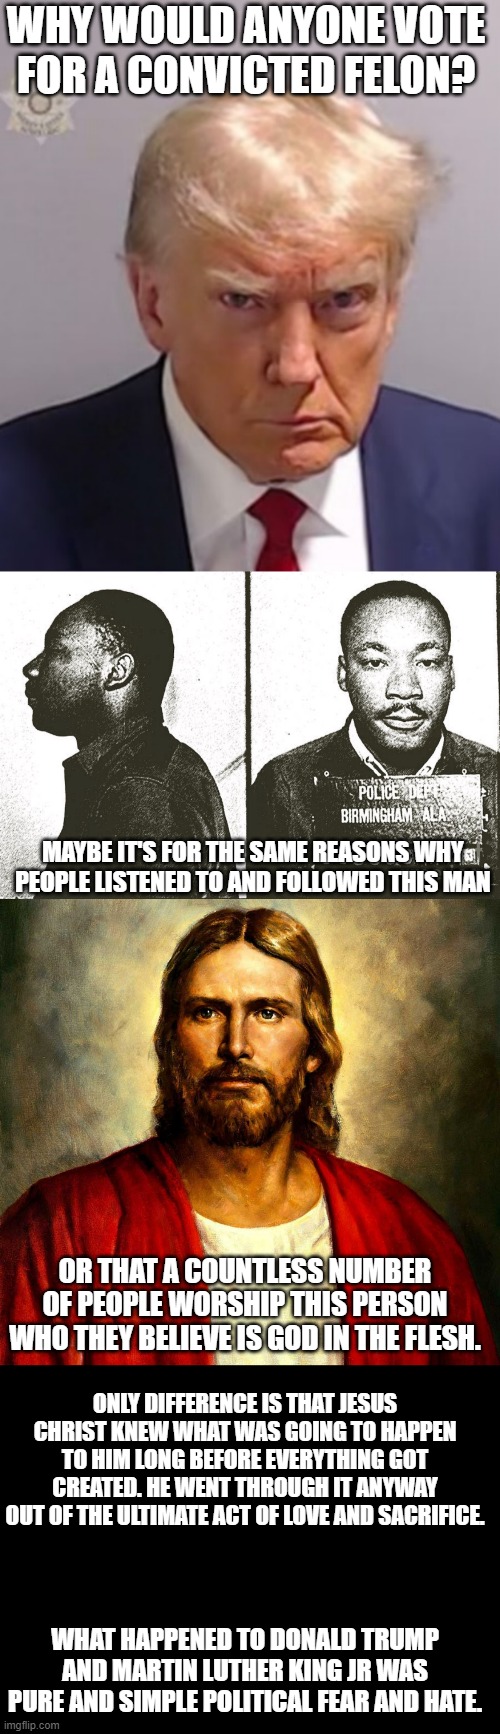 Purposely going after people who want just want to do good never turns out the way one expects. | WHY WOULD ANYONE VOTE FOR A CONVICTED FELON? MAYBE IT'S FOR THE SAME REASONS WHY PEOPLE LISTENED TO AND FOLLOWED THIS MAN; OR THAT A COUNTLESS NUMBER OF PEOPLE WORSHIP THIS PERSON WHO THEY BELIEVE IS GOD IN THE FLESH. ONLY DIFFERENCE IS THAT JESUS CHRIST KNEW WHAT WAS GOING TO HAPPEN TO HIM LONG BEFORE EVERYTHING GOT CREATED. HE WENT THROUGH IT ANYWAY OUT OF THE ULTIMATE ACT OF LOVE AND SACRIFICE. WHAT HAPPENED TO DONALD TRUMP AND MARTIN LUTHER KING JR WAS PURE AND SIMPLE POLITICAL FEAR AND HATE. | image tagged in donald trump mugshot,jesus christ,blank black,poltics | made w/ Imgflip meme maker